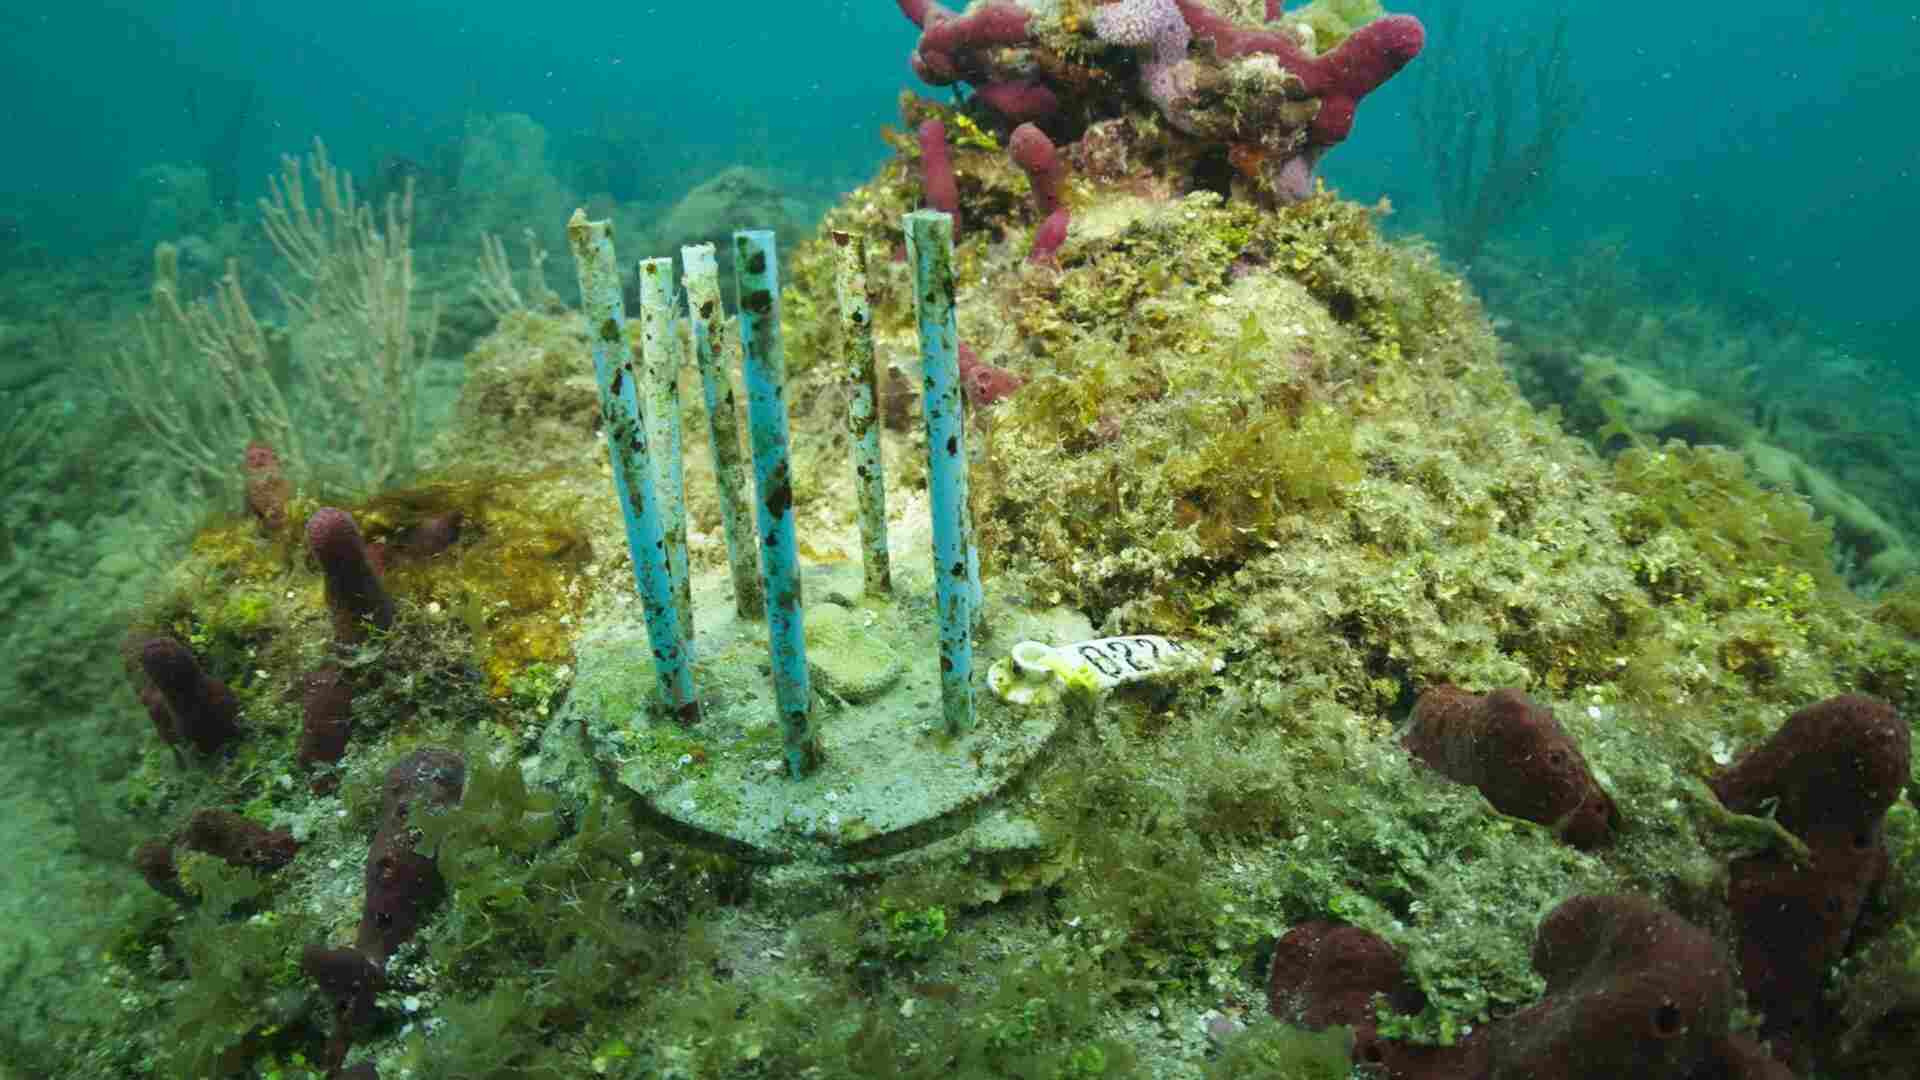 Researchers grasp at biodegradable straws to stop the decline of lab-grown coral reef